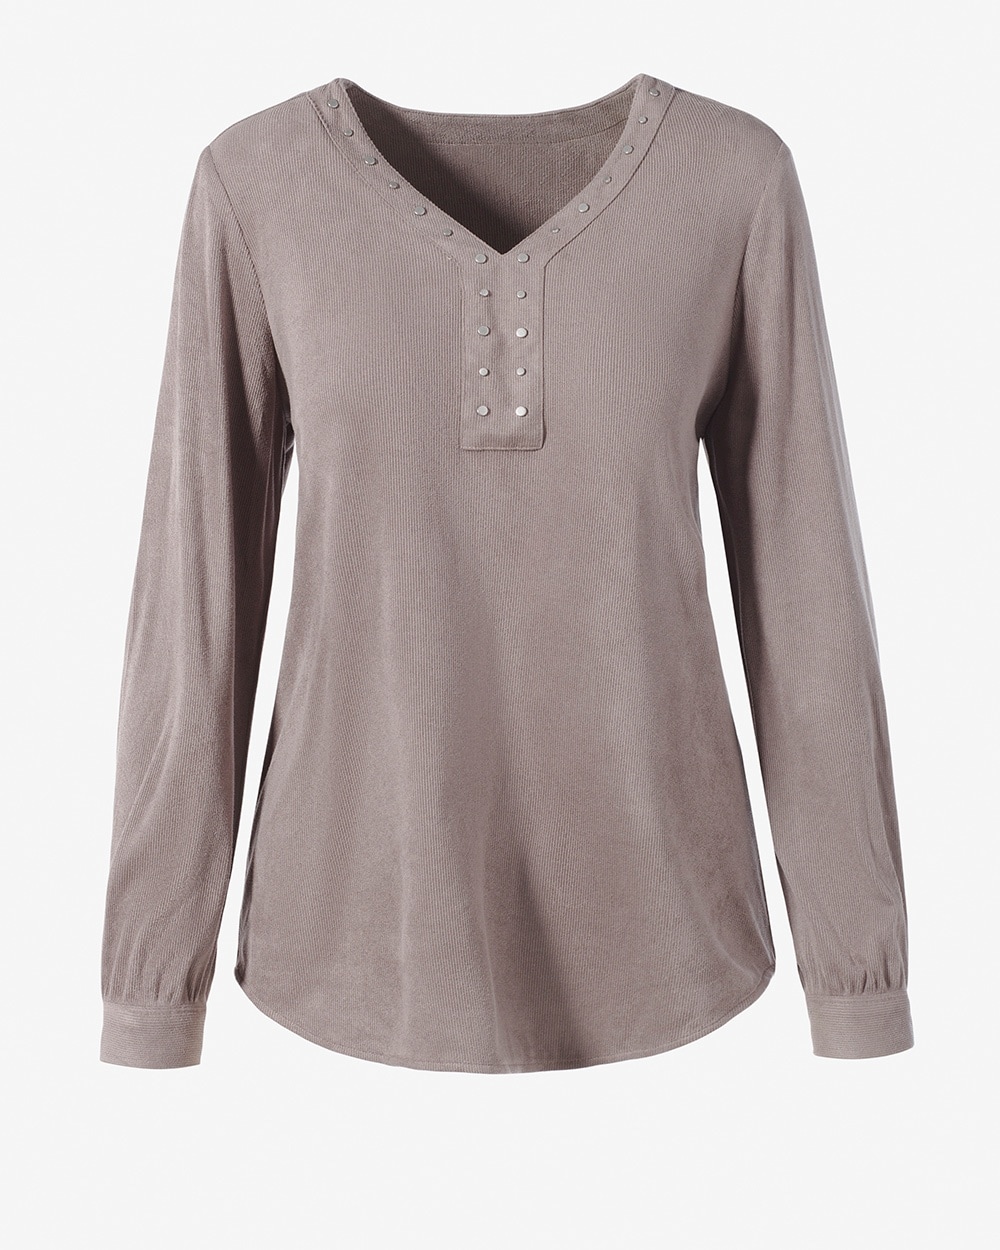 Embellished Corded Faux-Suede Top